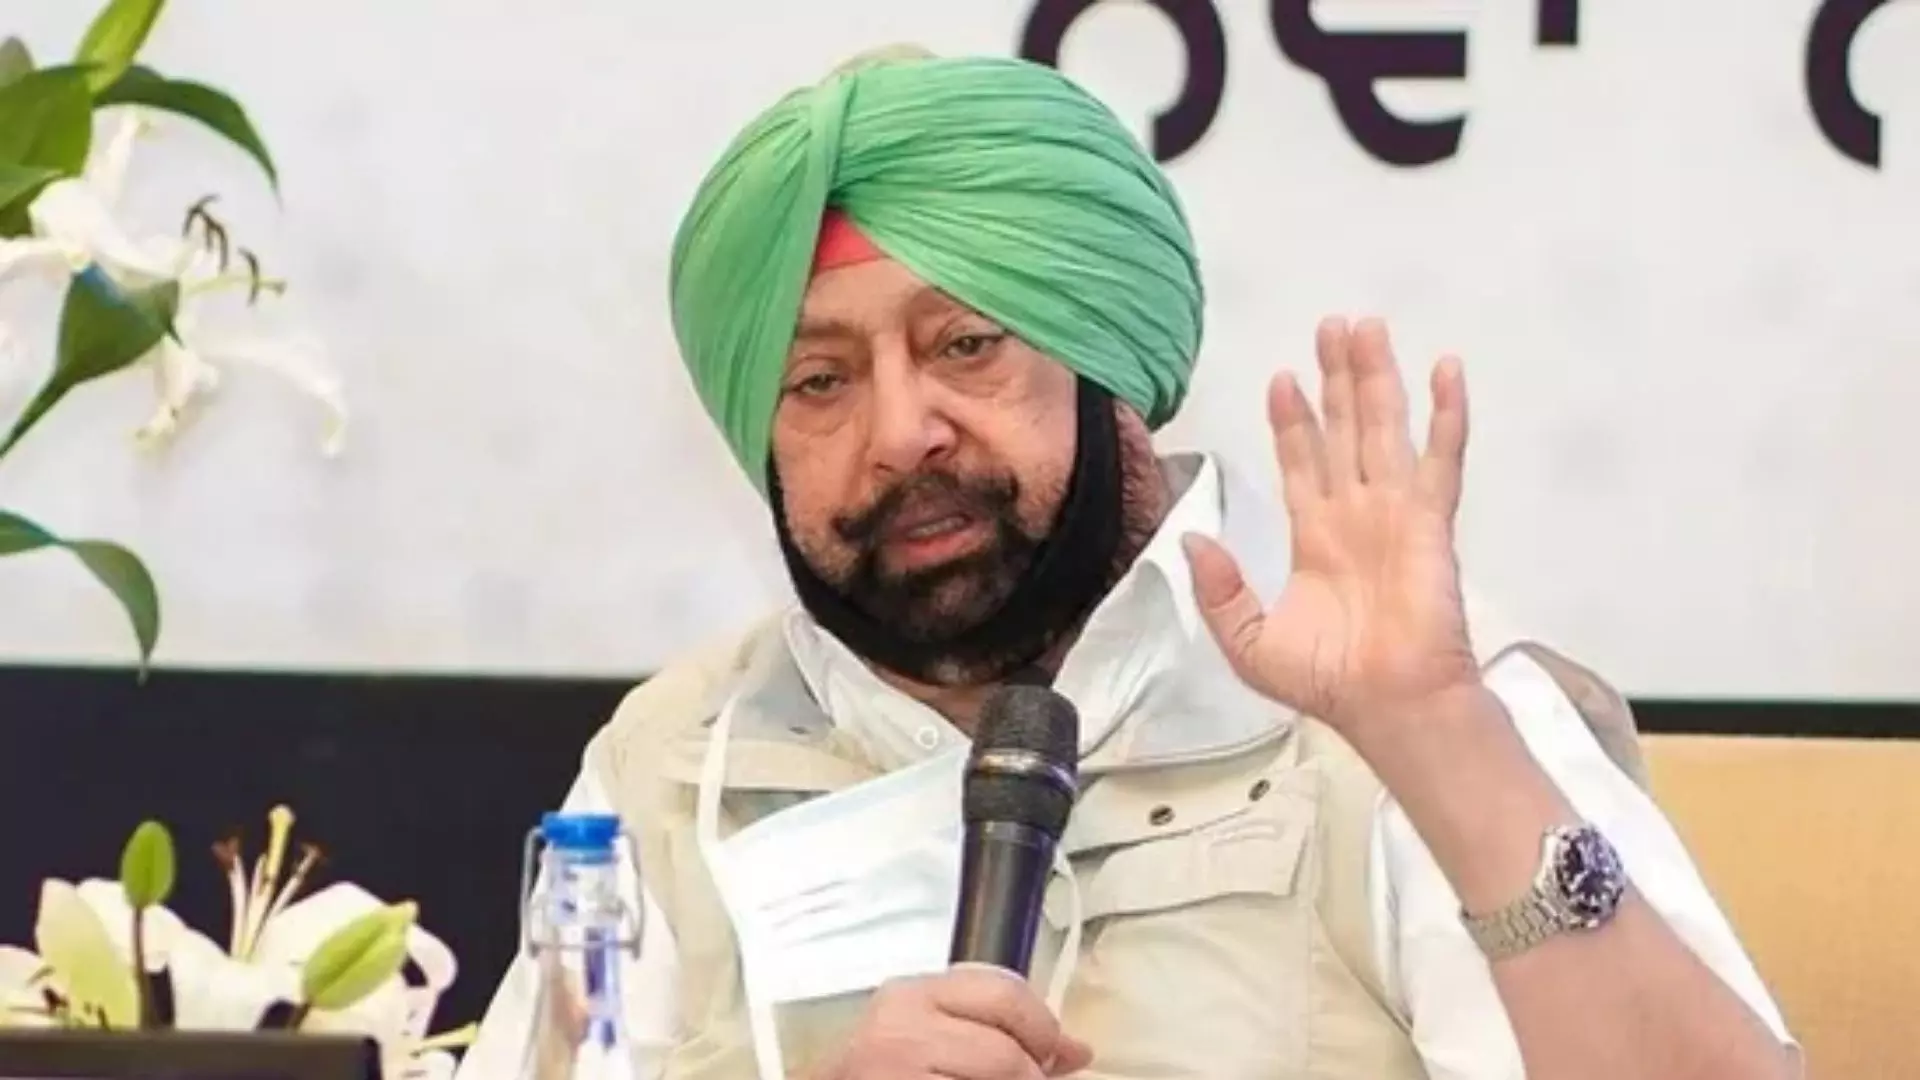 Punjab Former Captain Amarinder Singh is Going to Form a new Political Party Soon